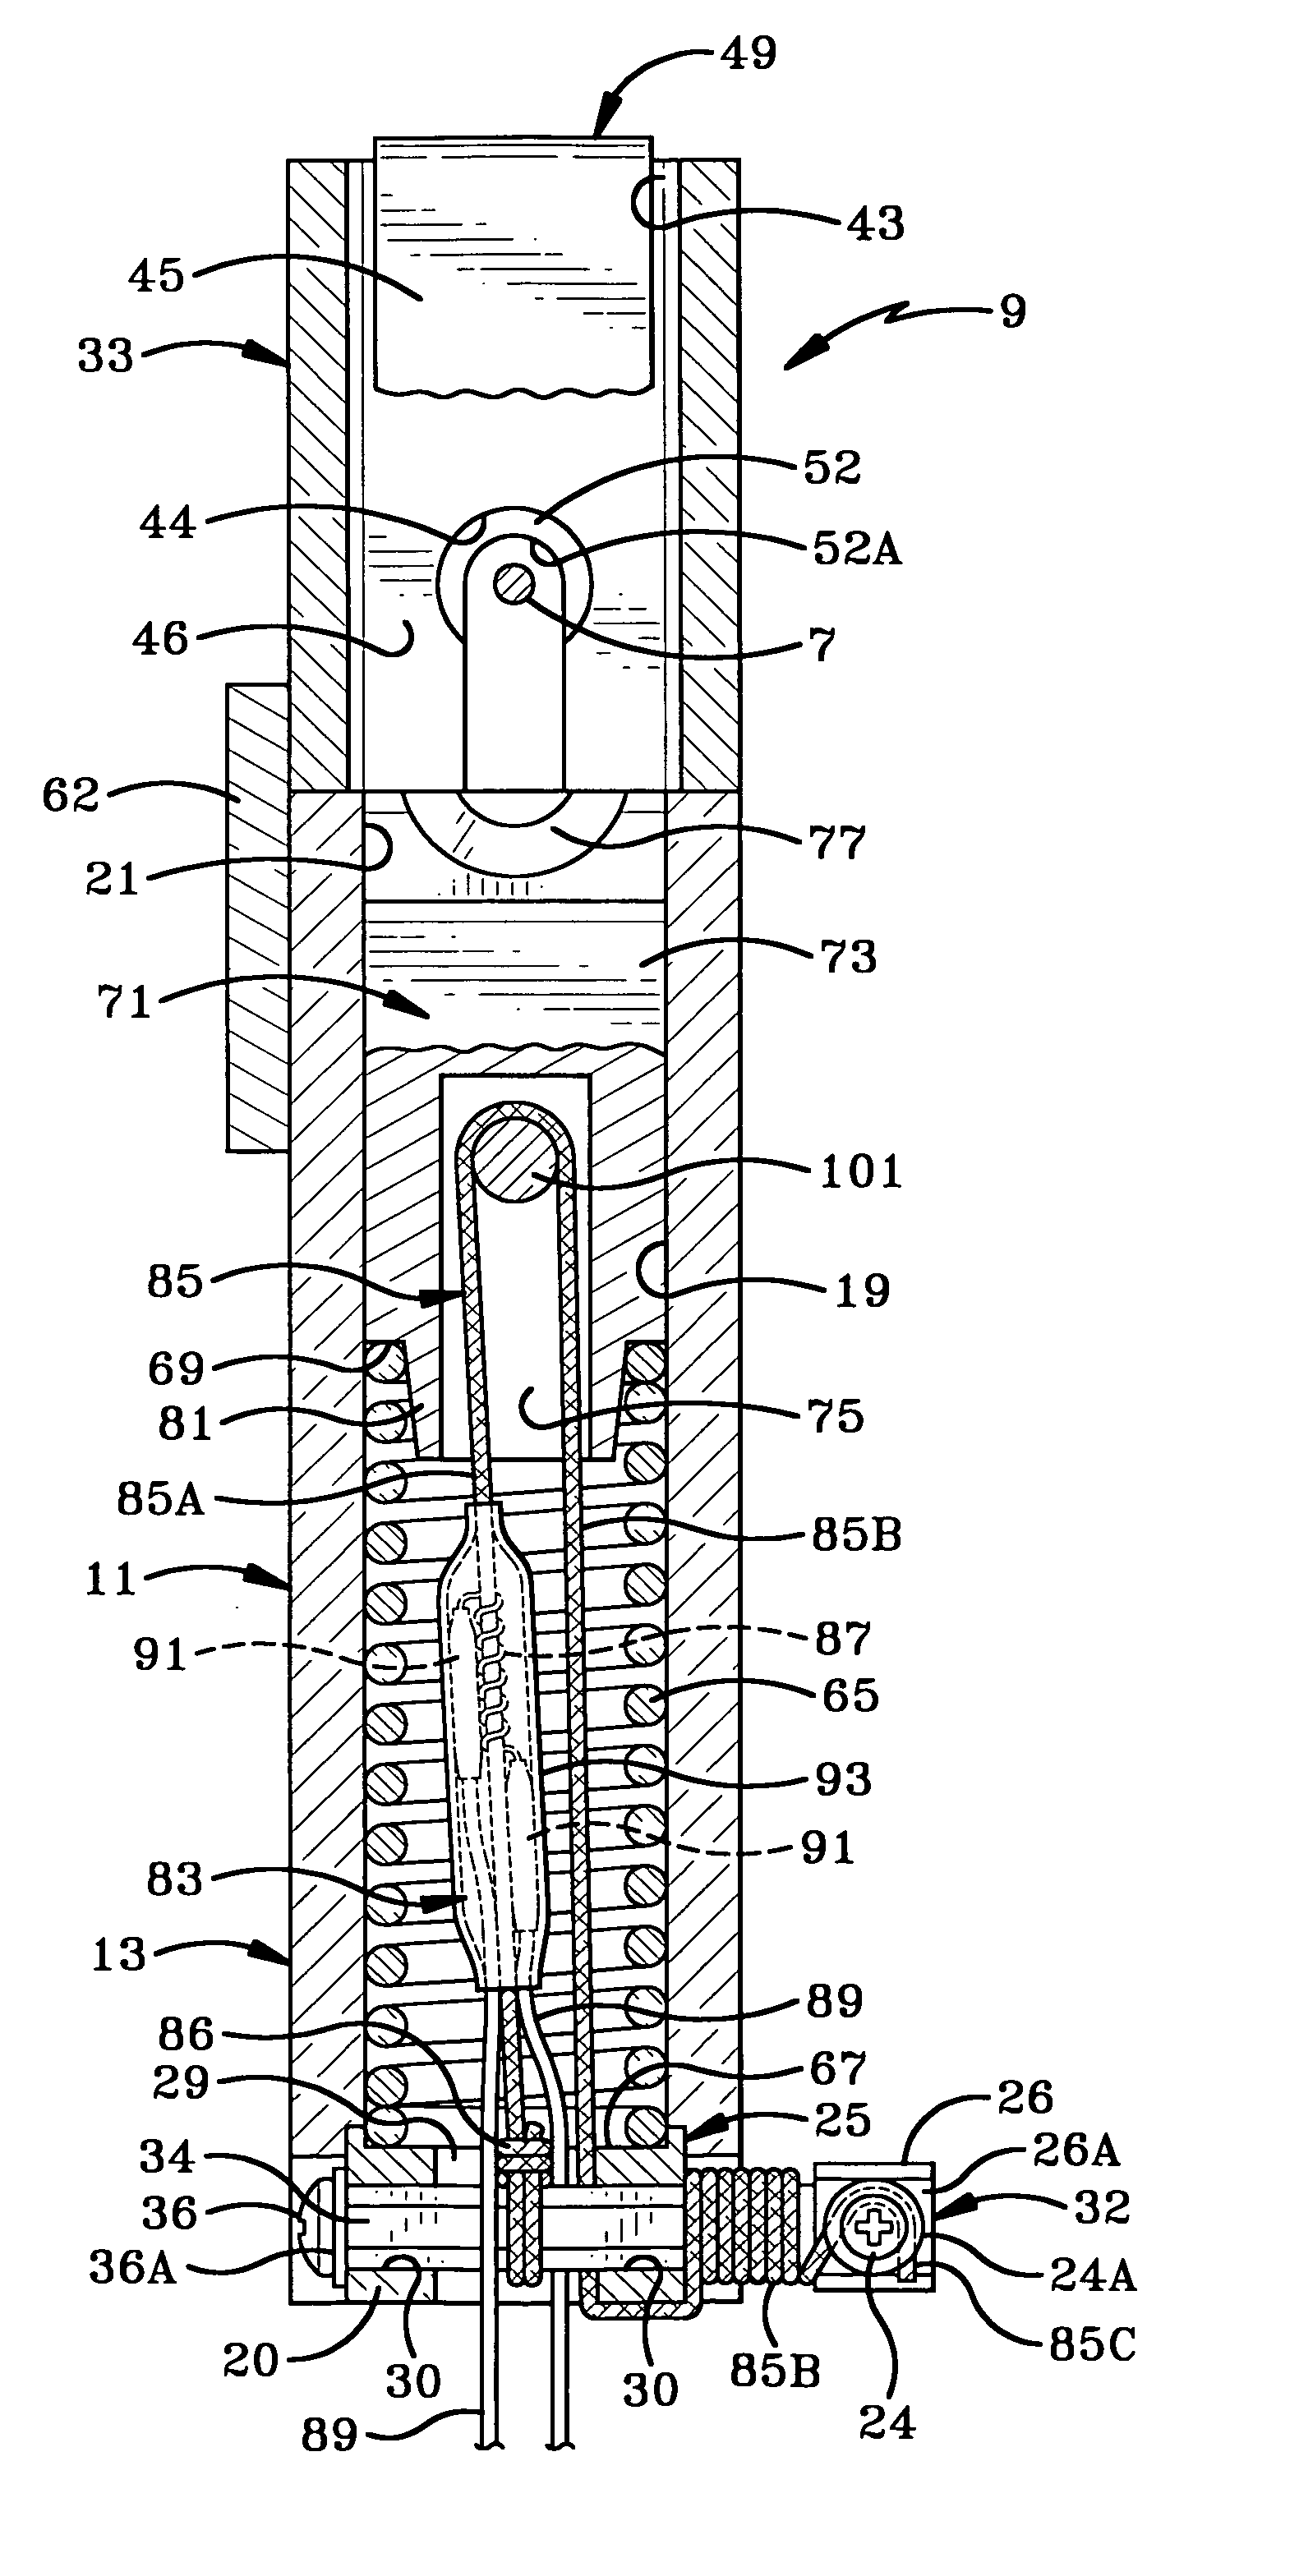 Method and apparatus for rapid severance of a decoy towline